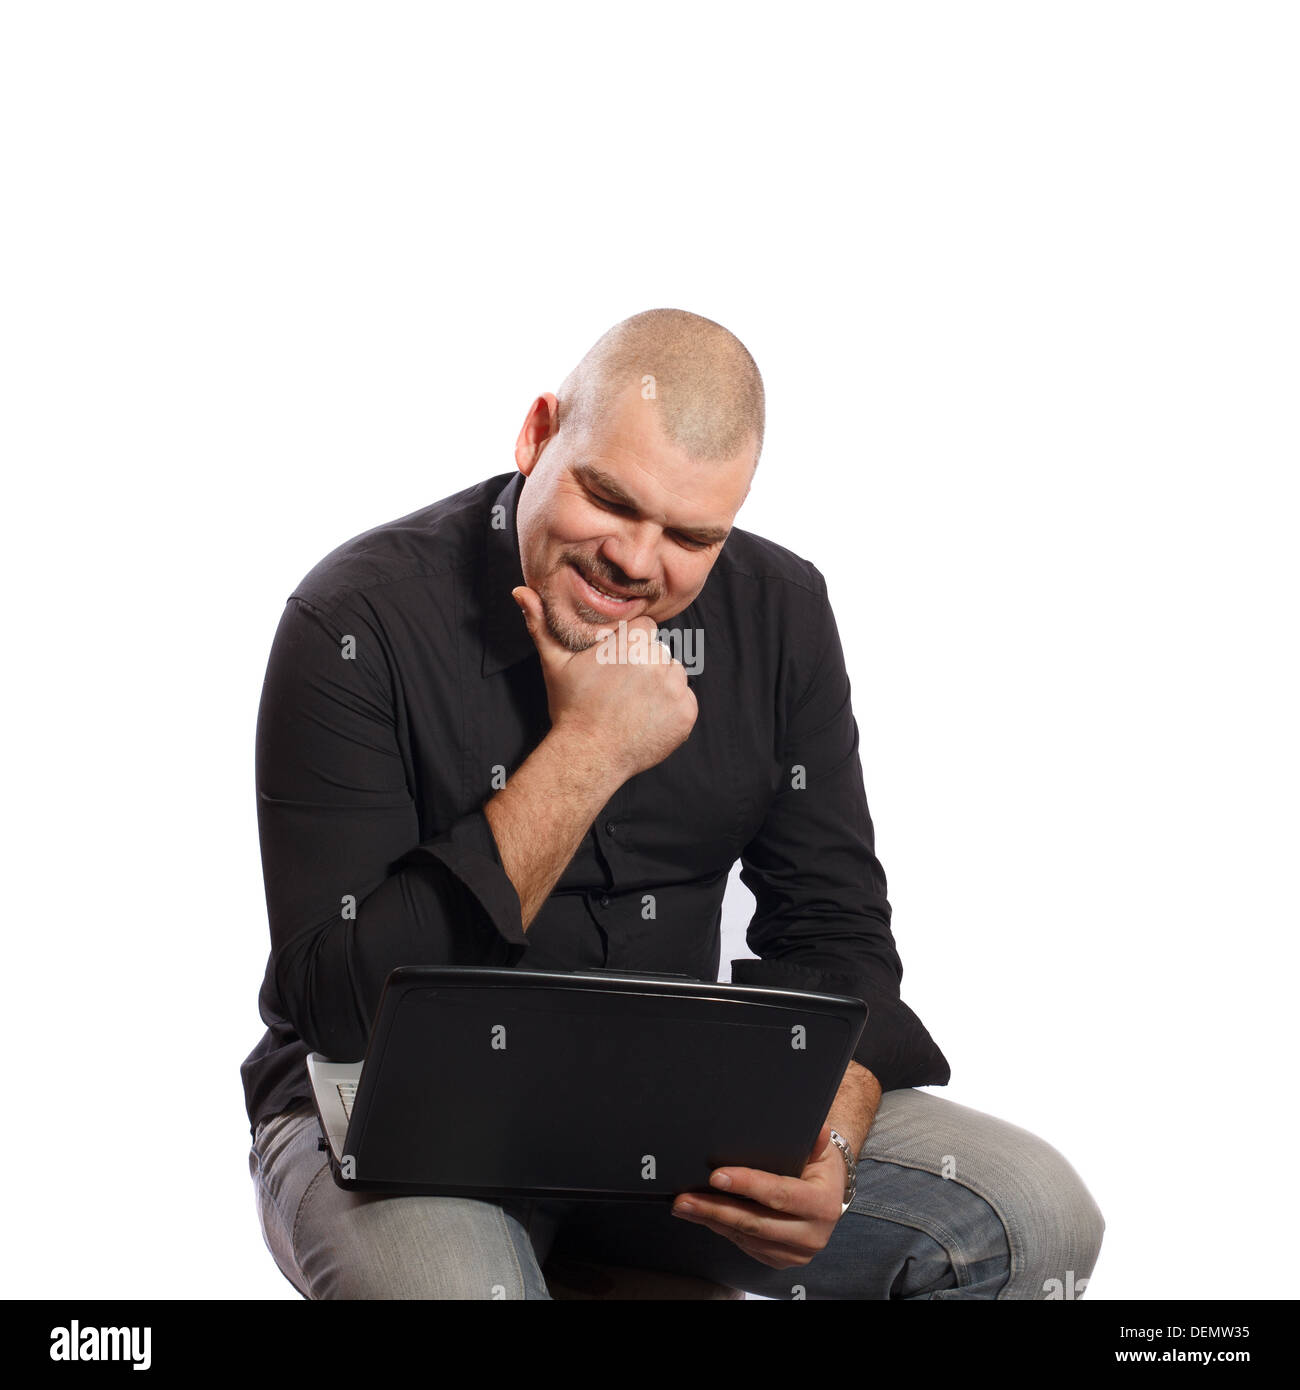 Thoughtful man sitting and looking at her computer on white background Stock Photo